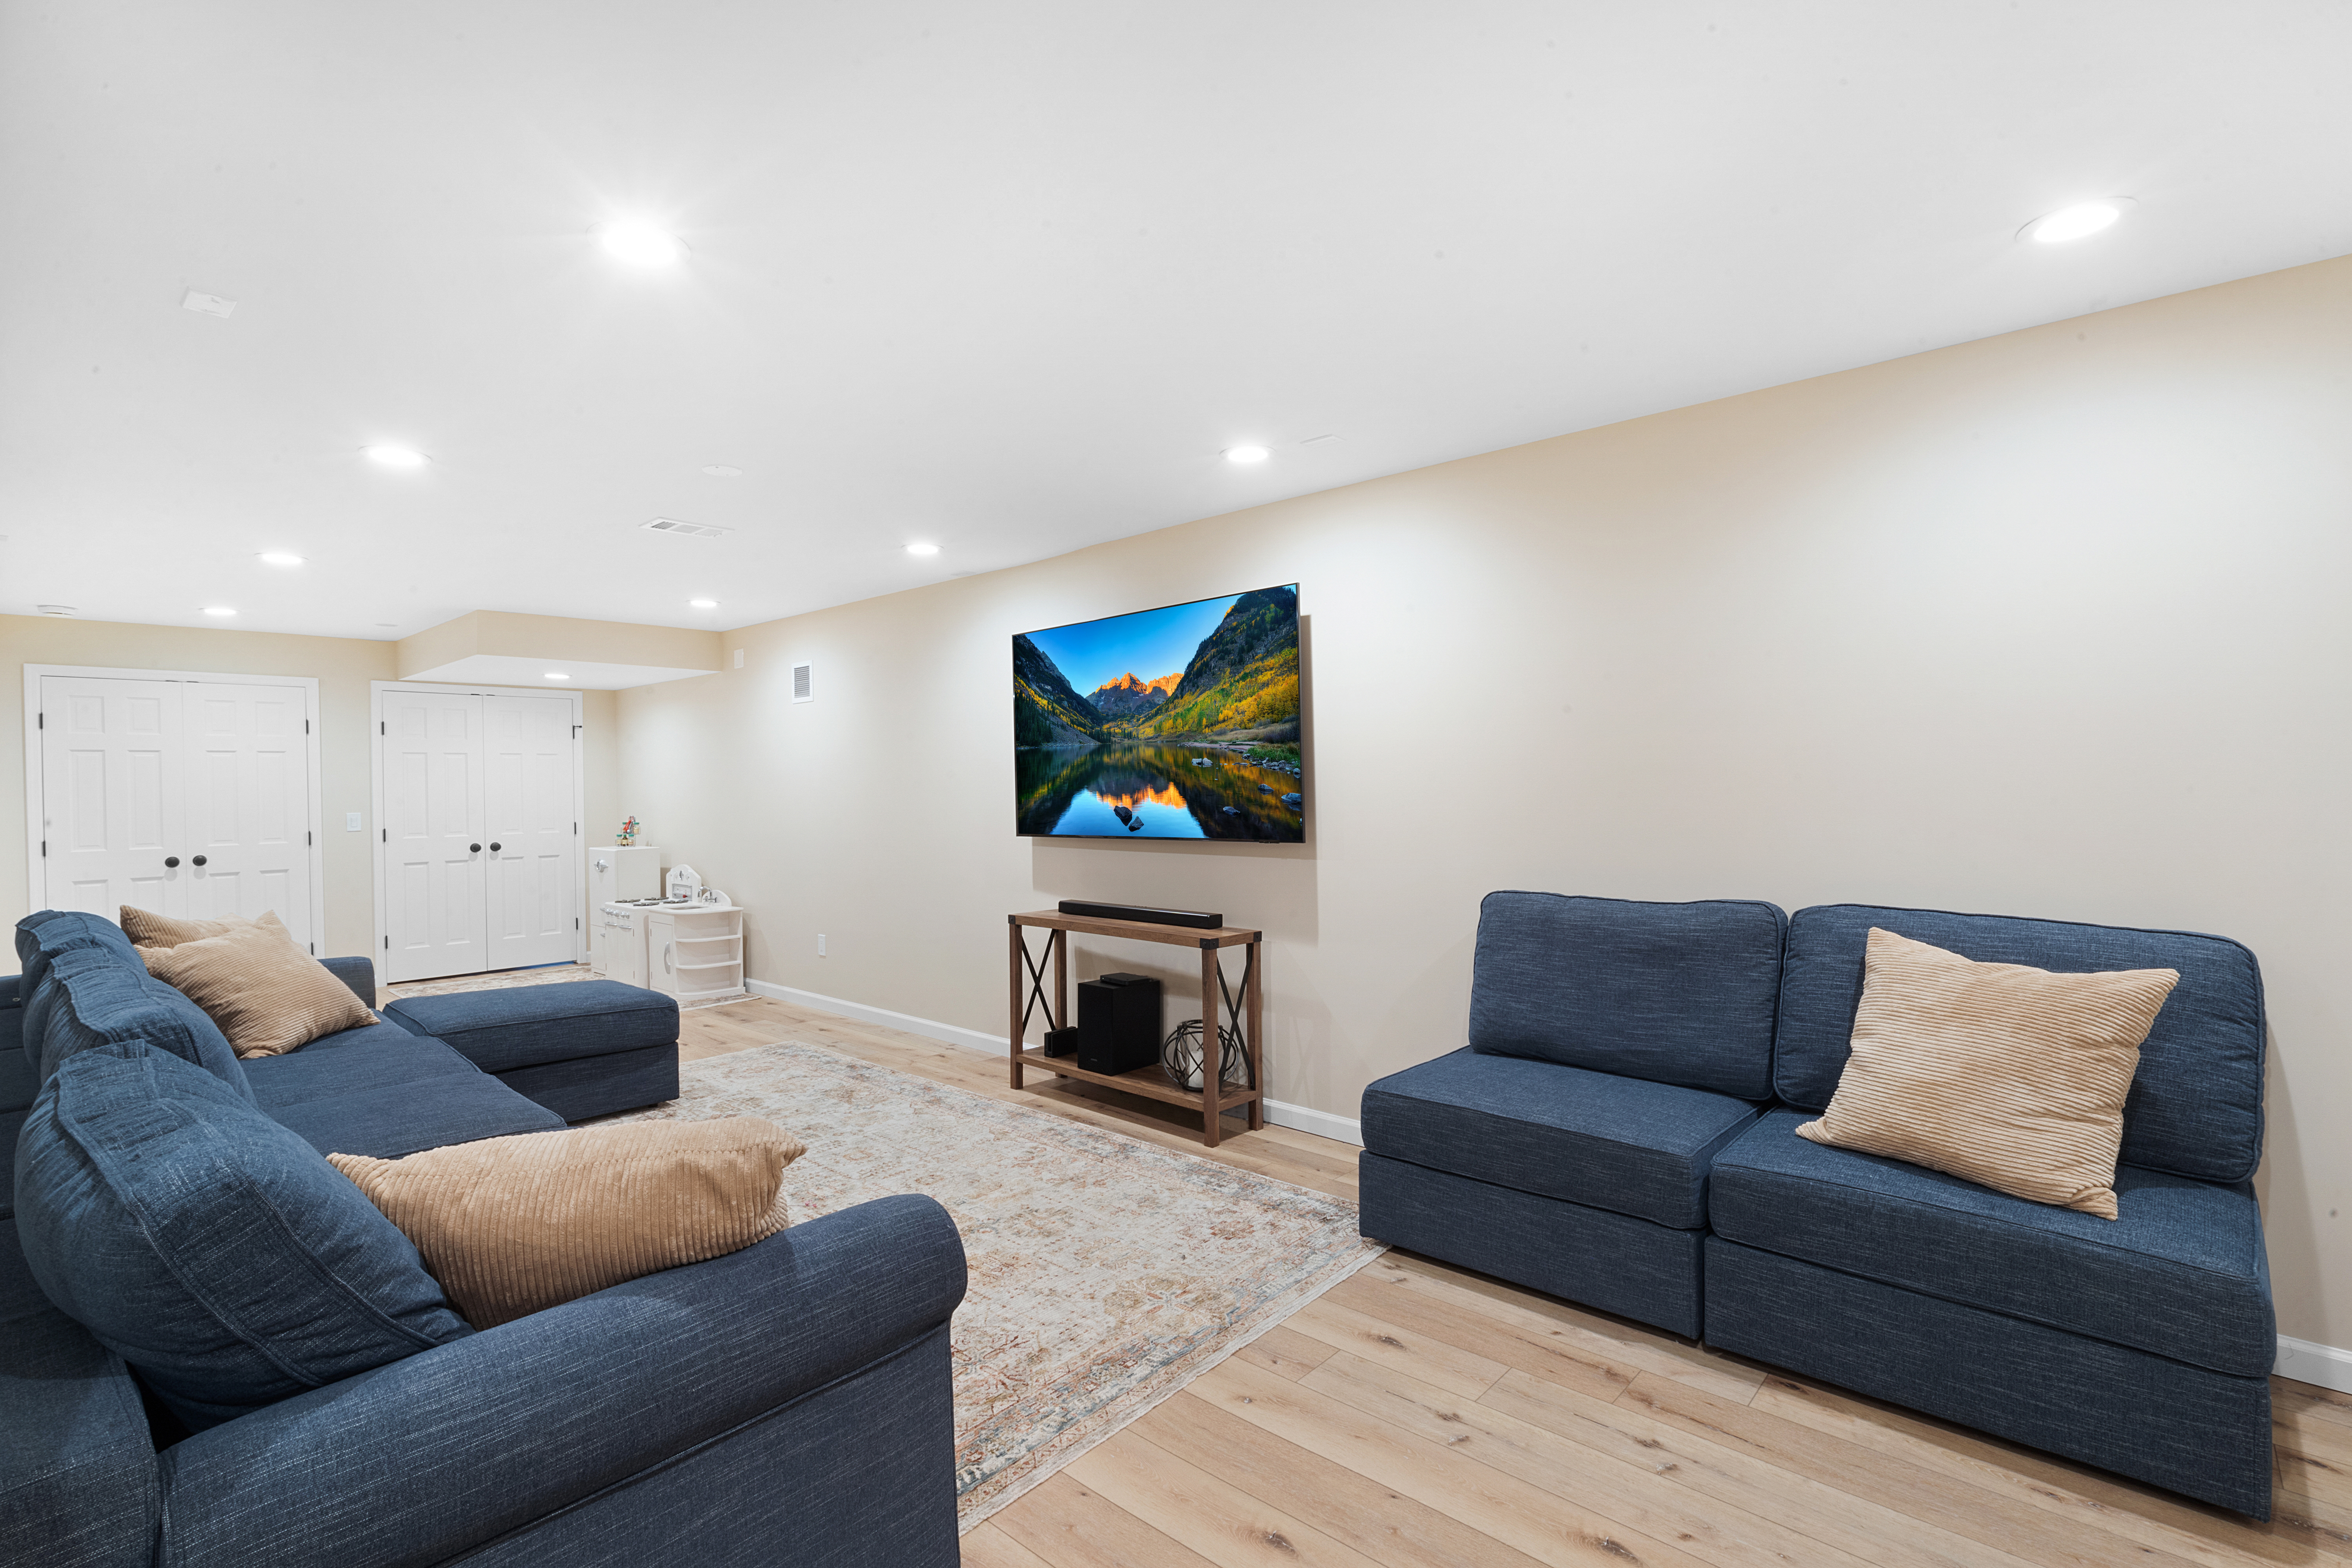 Basement remodel with gym, bar and family room in Mendham, NJ